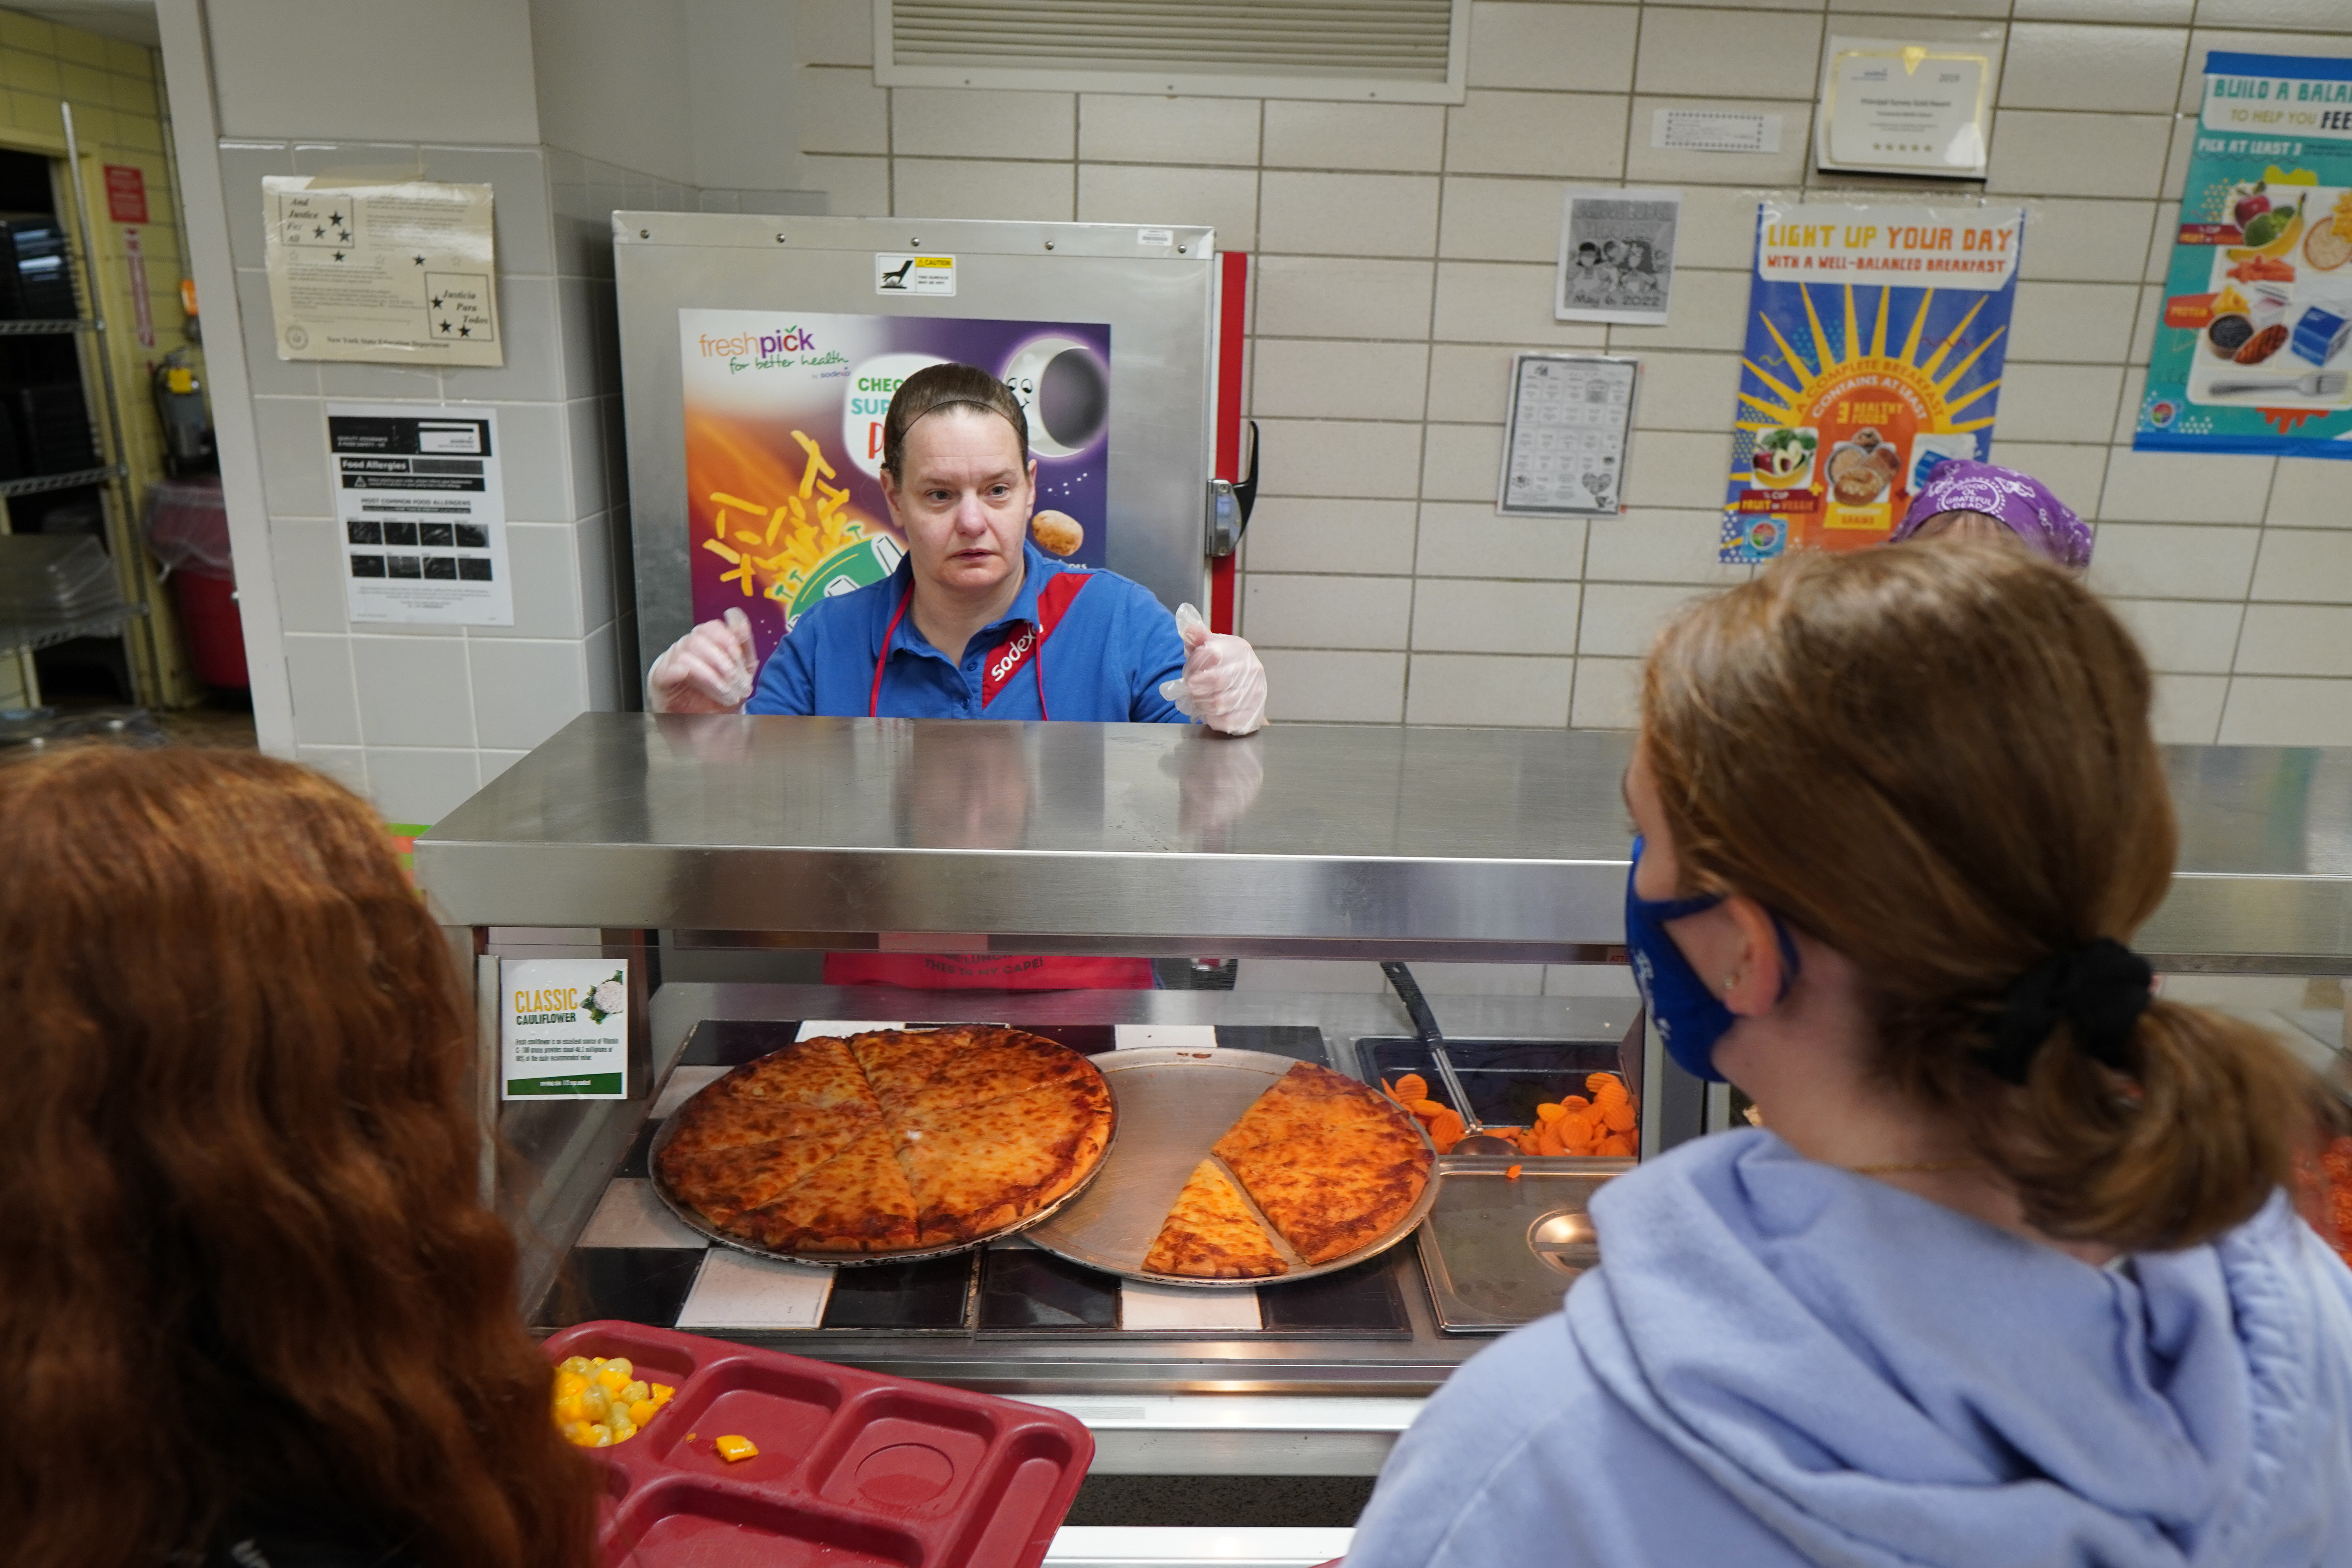 Students choosing meals in line at the Tonawanda Middle School lunch room.